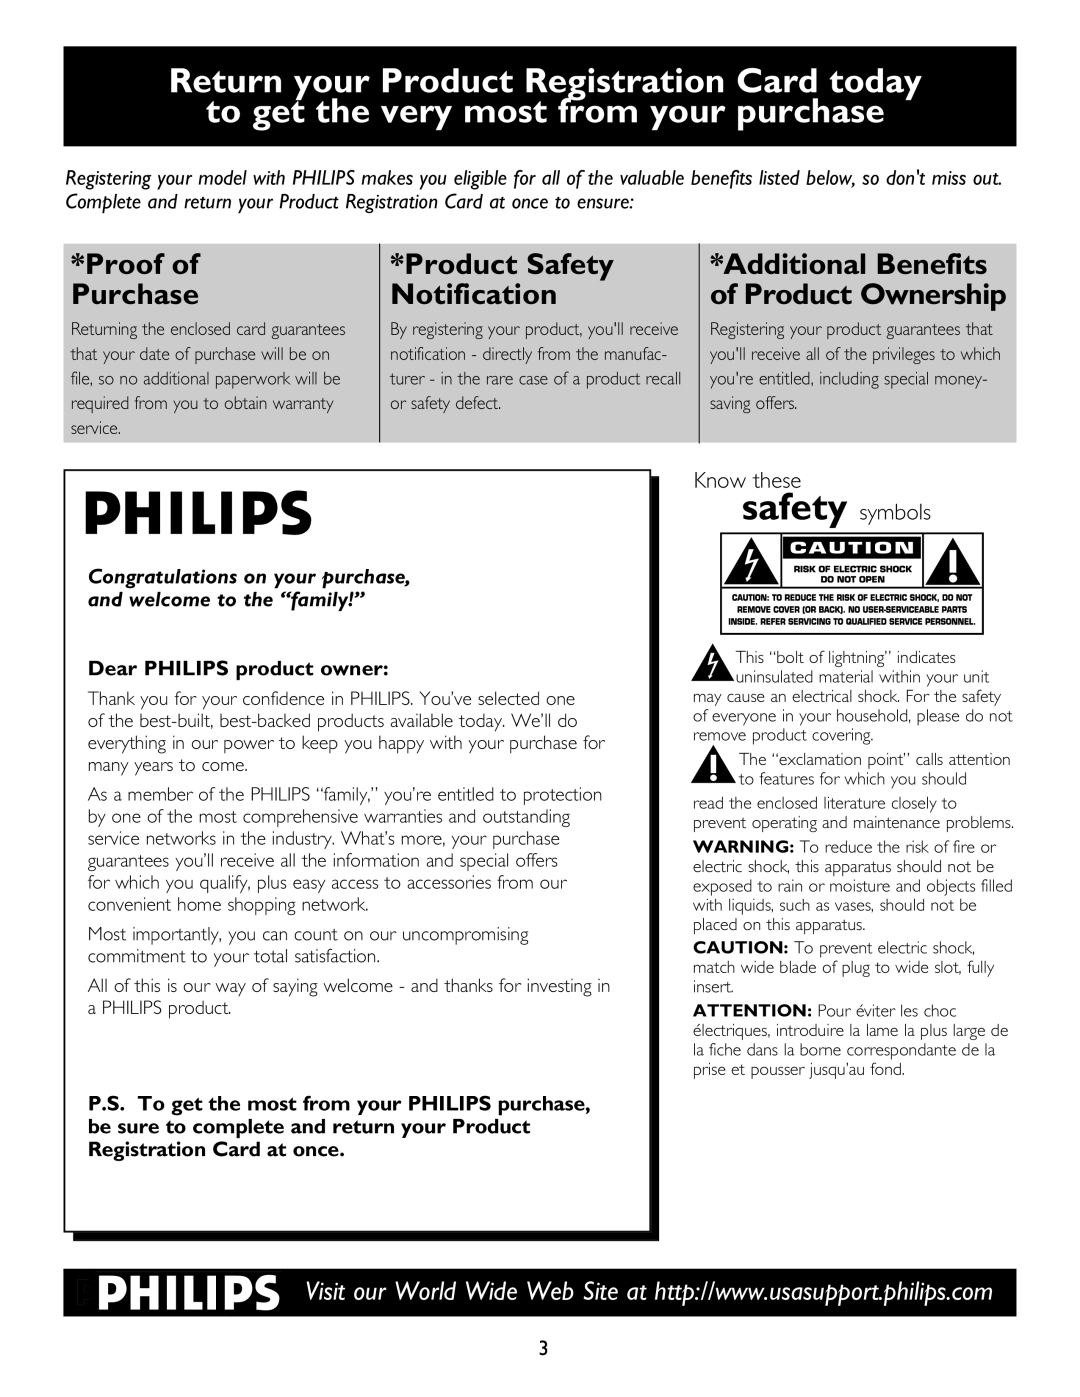 Philips 20PT6446 Product Safety Notification, Know these safety symbols, Proof of Purchase, Dear PHILIPS product owner 